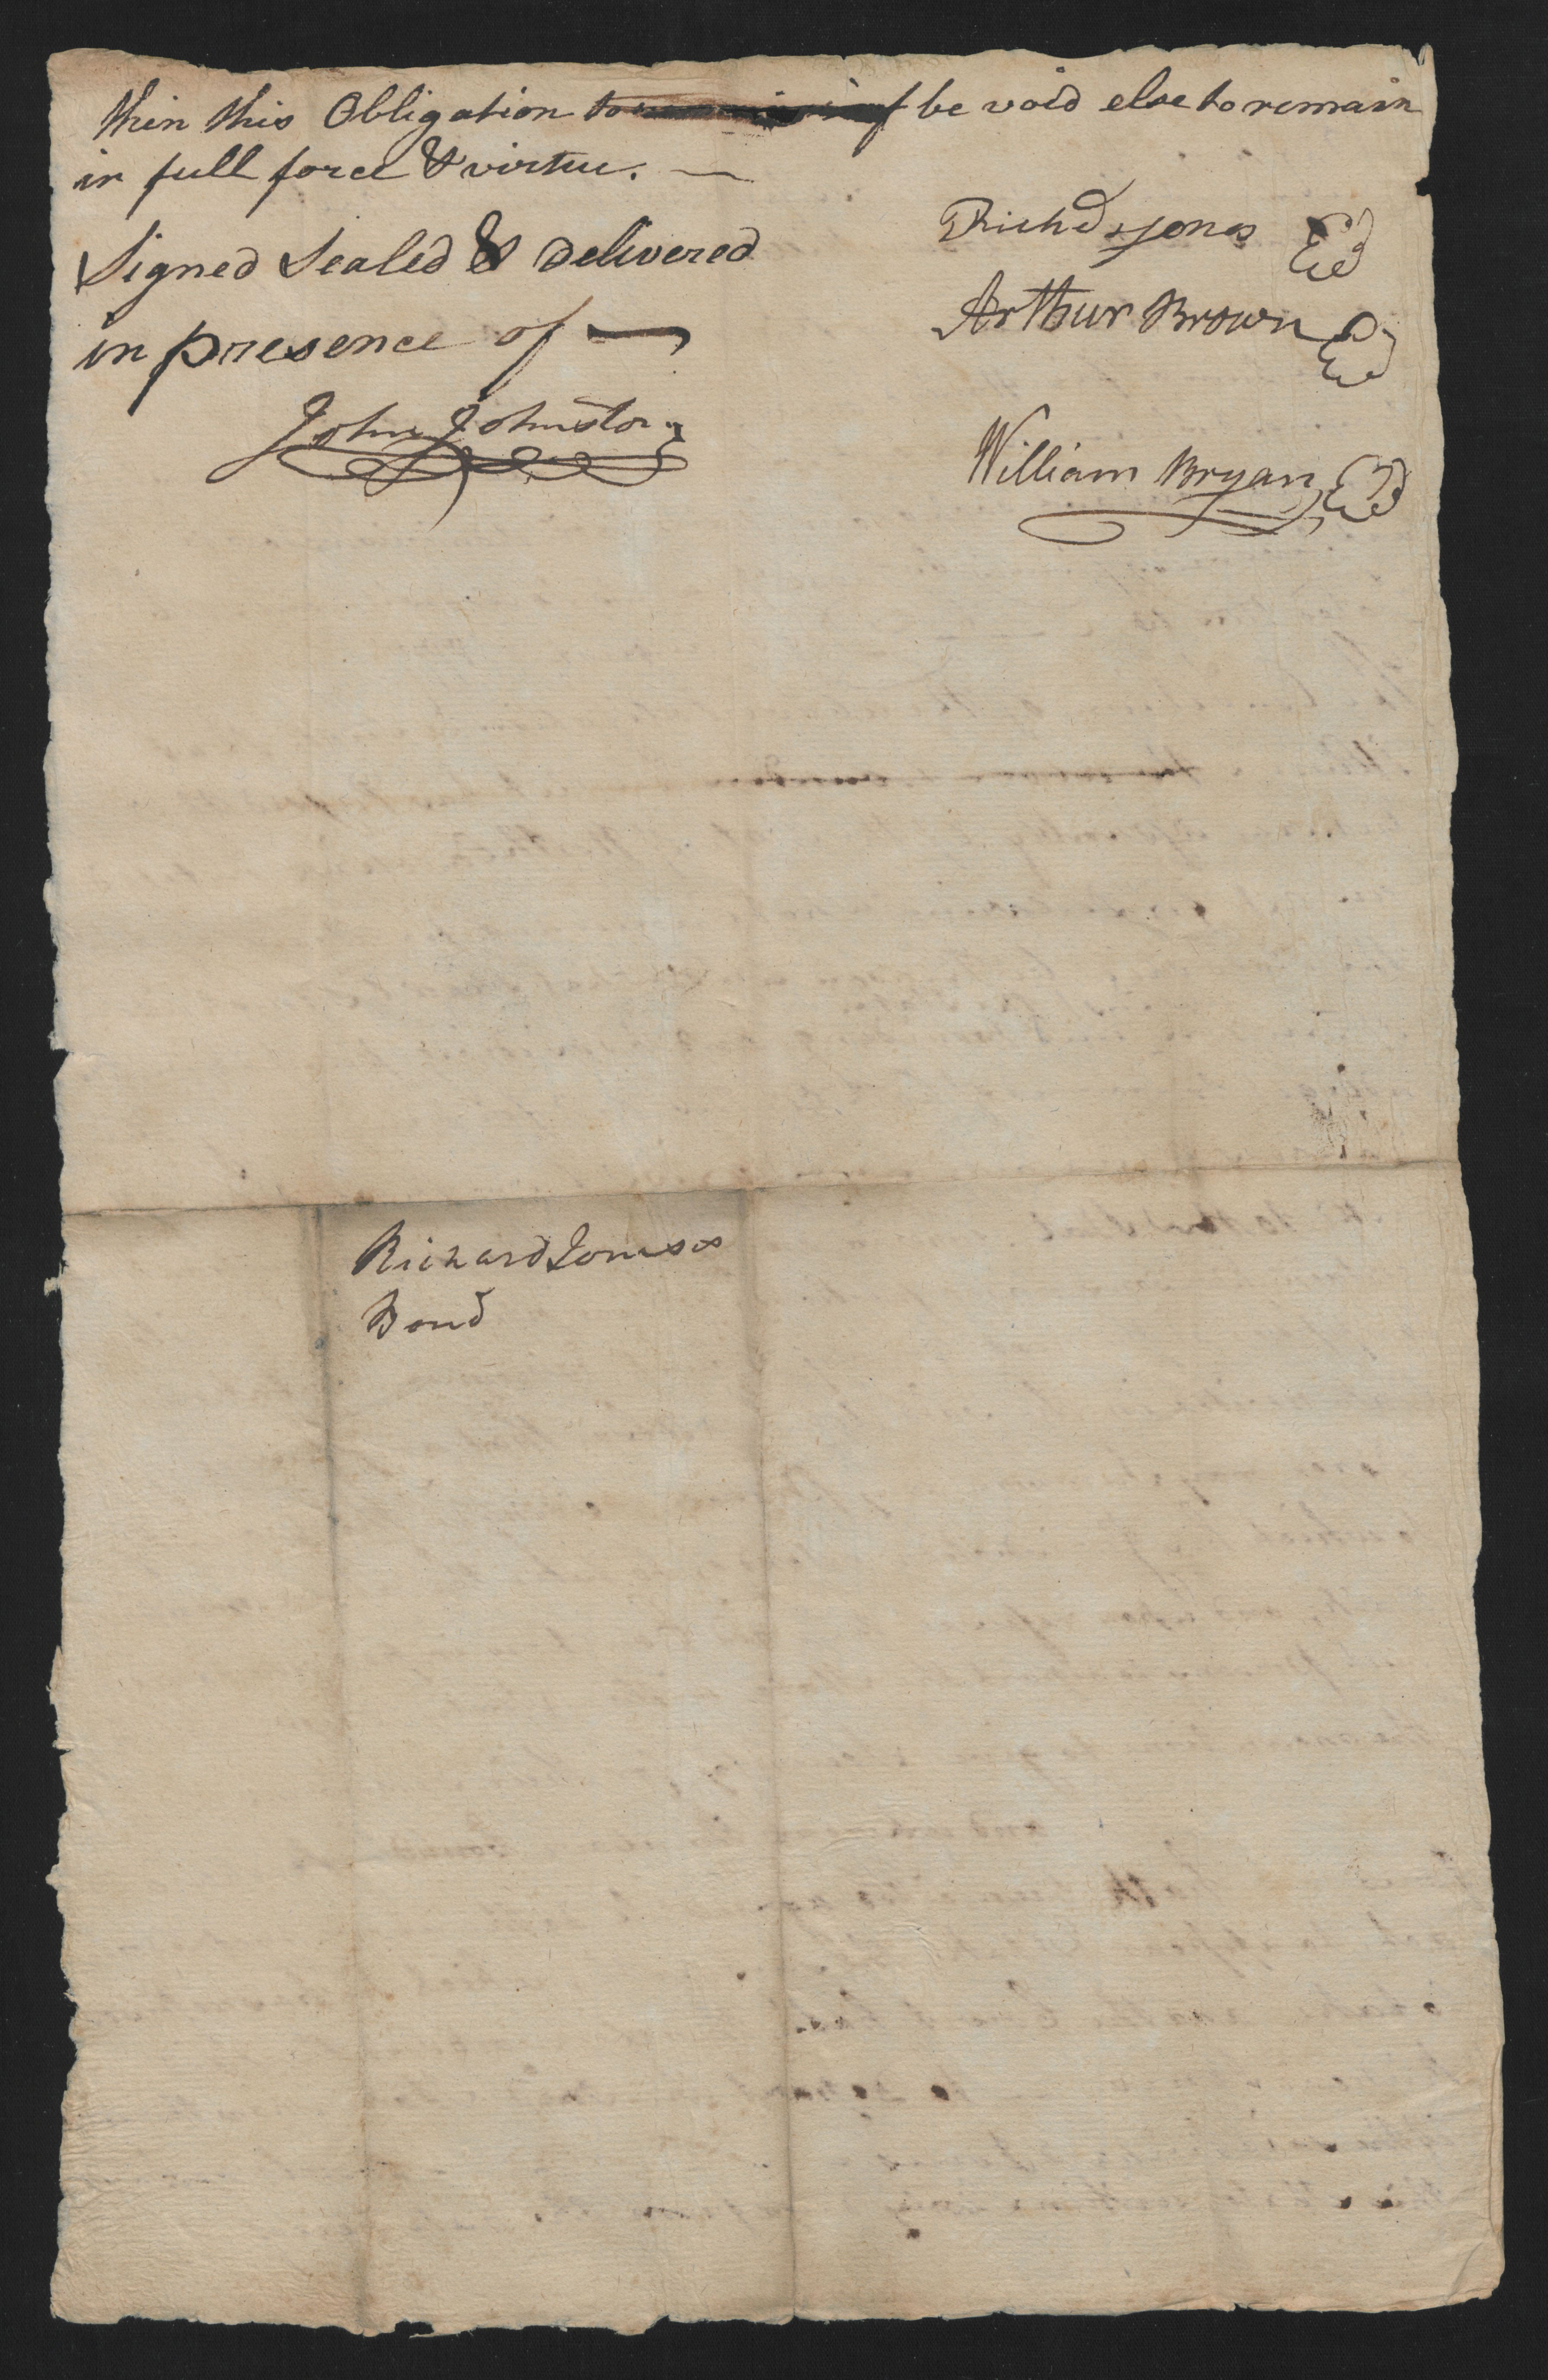 Bond from the Bertie County Court for Richard Jones to leave North Carolina, 13 August 1777, page 2